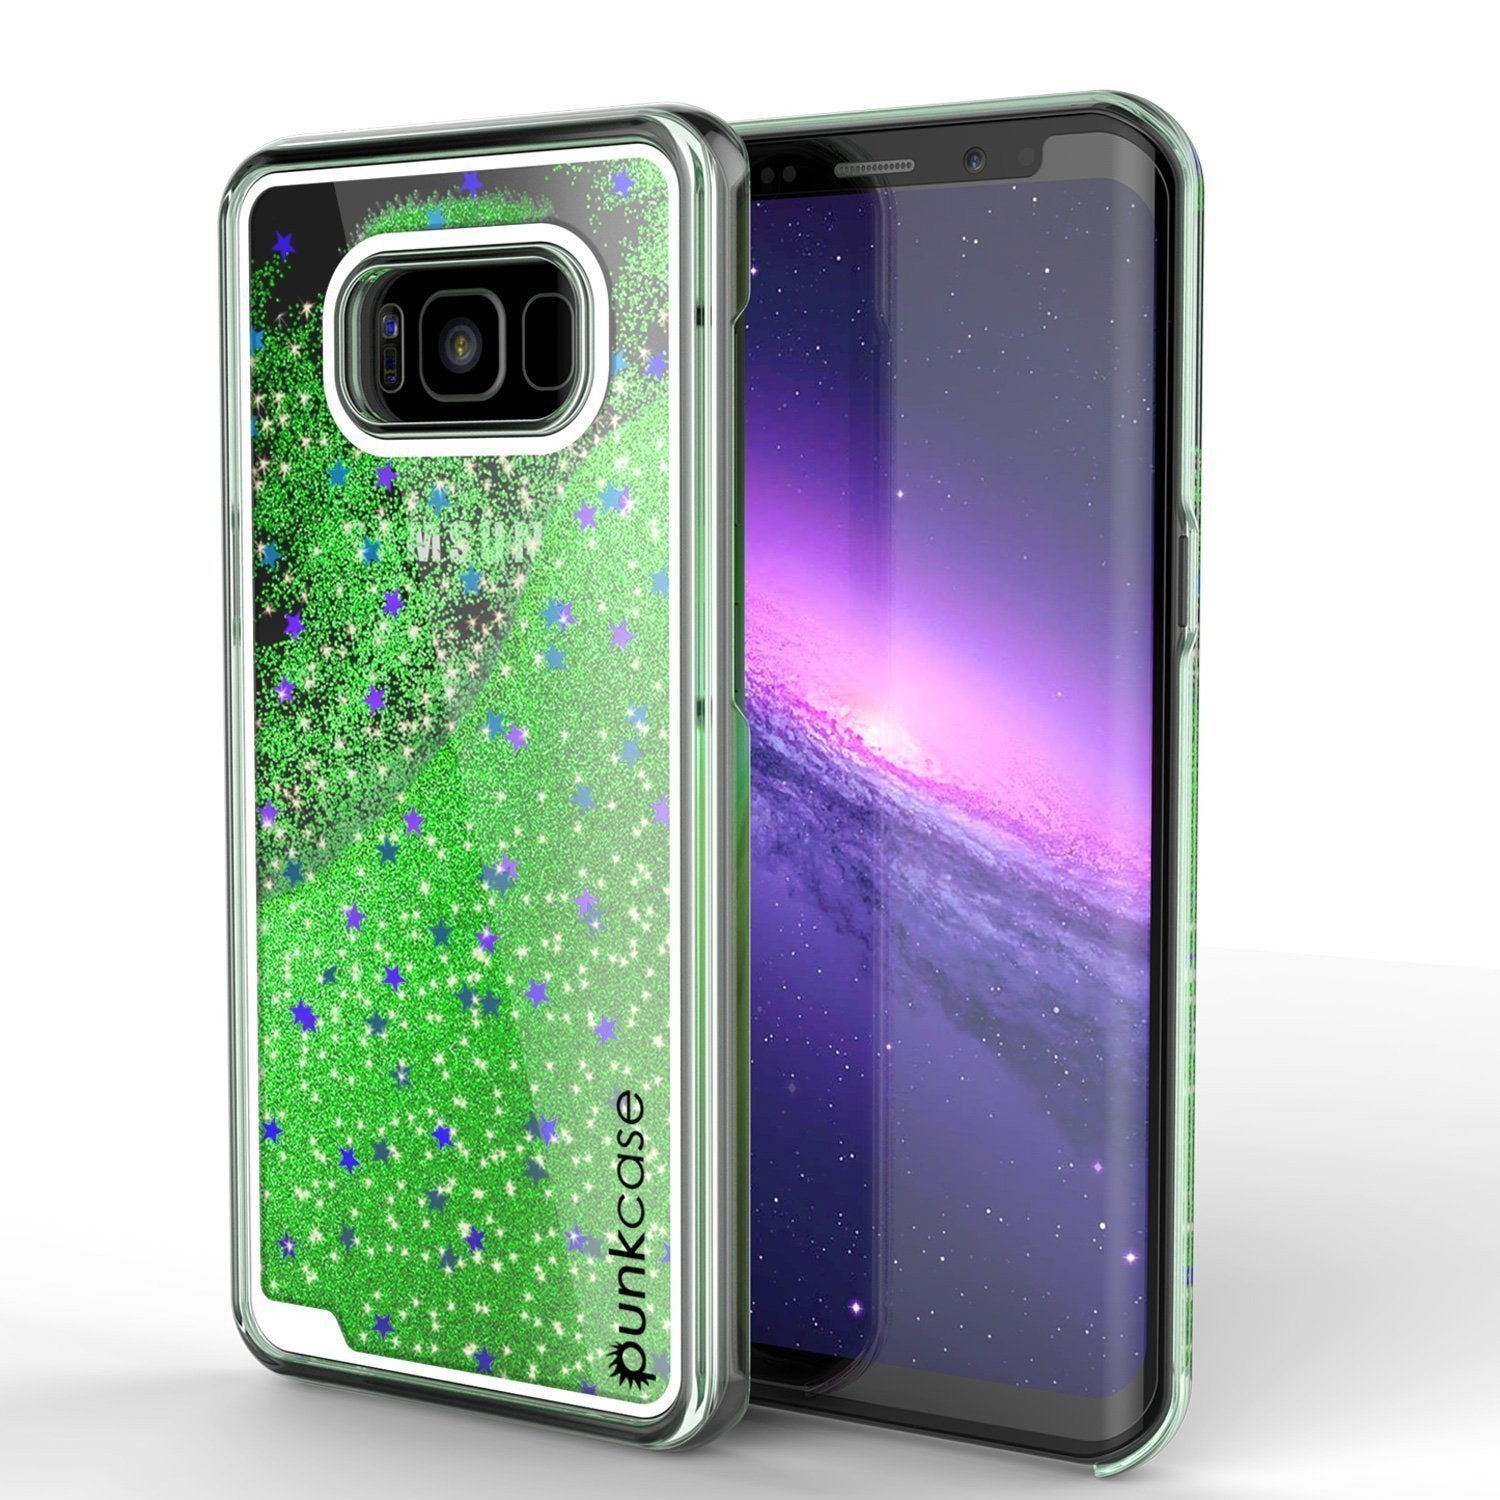 Galaxy S8 Case, Punkcase [Liquid Series] Protective Dual Layer Floating Glitter Cover [Green]﻿